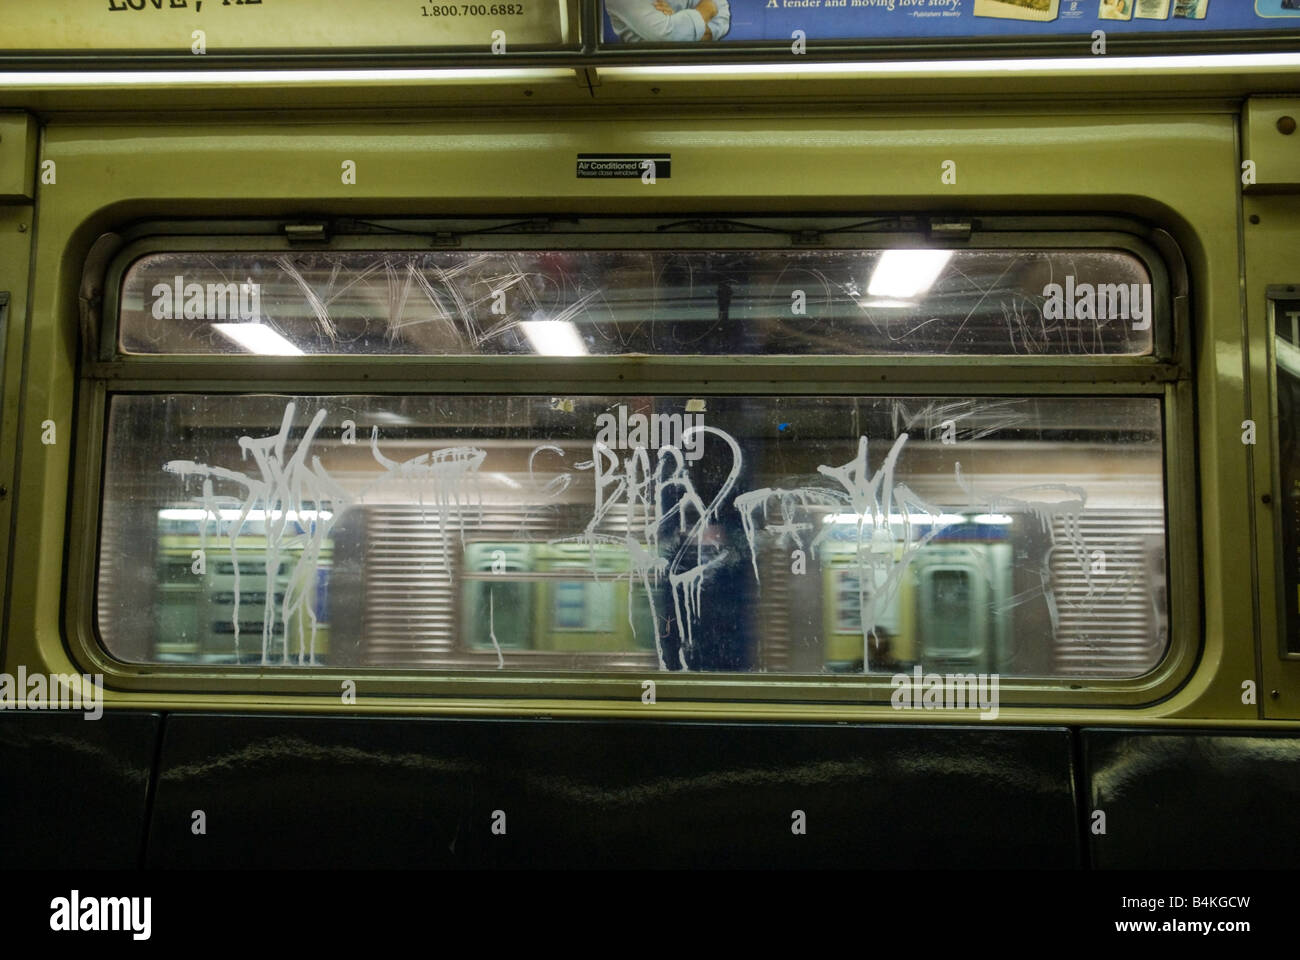 Acid etched graffiti in the New York subway Stock Photo